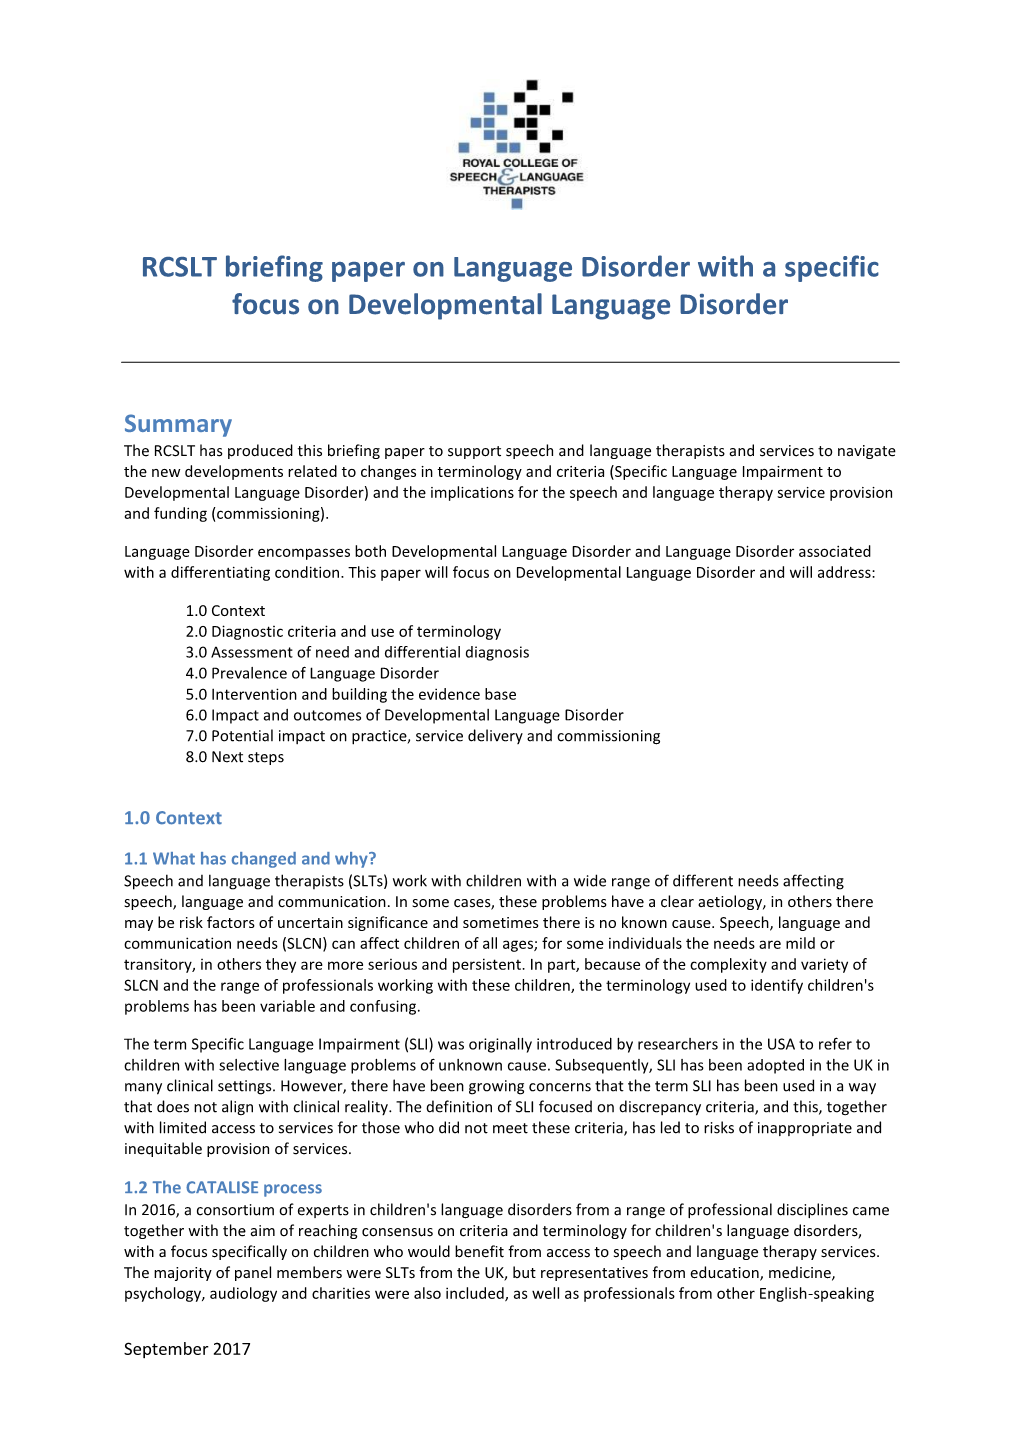 RCSLT Briefing Paper on Language Disorder with a Specific Focus on Developmental Language Disorder